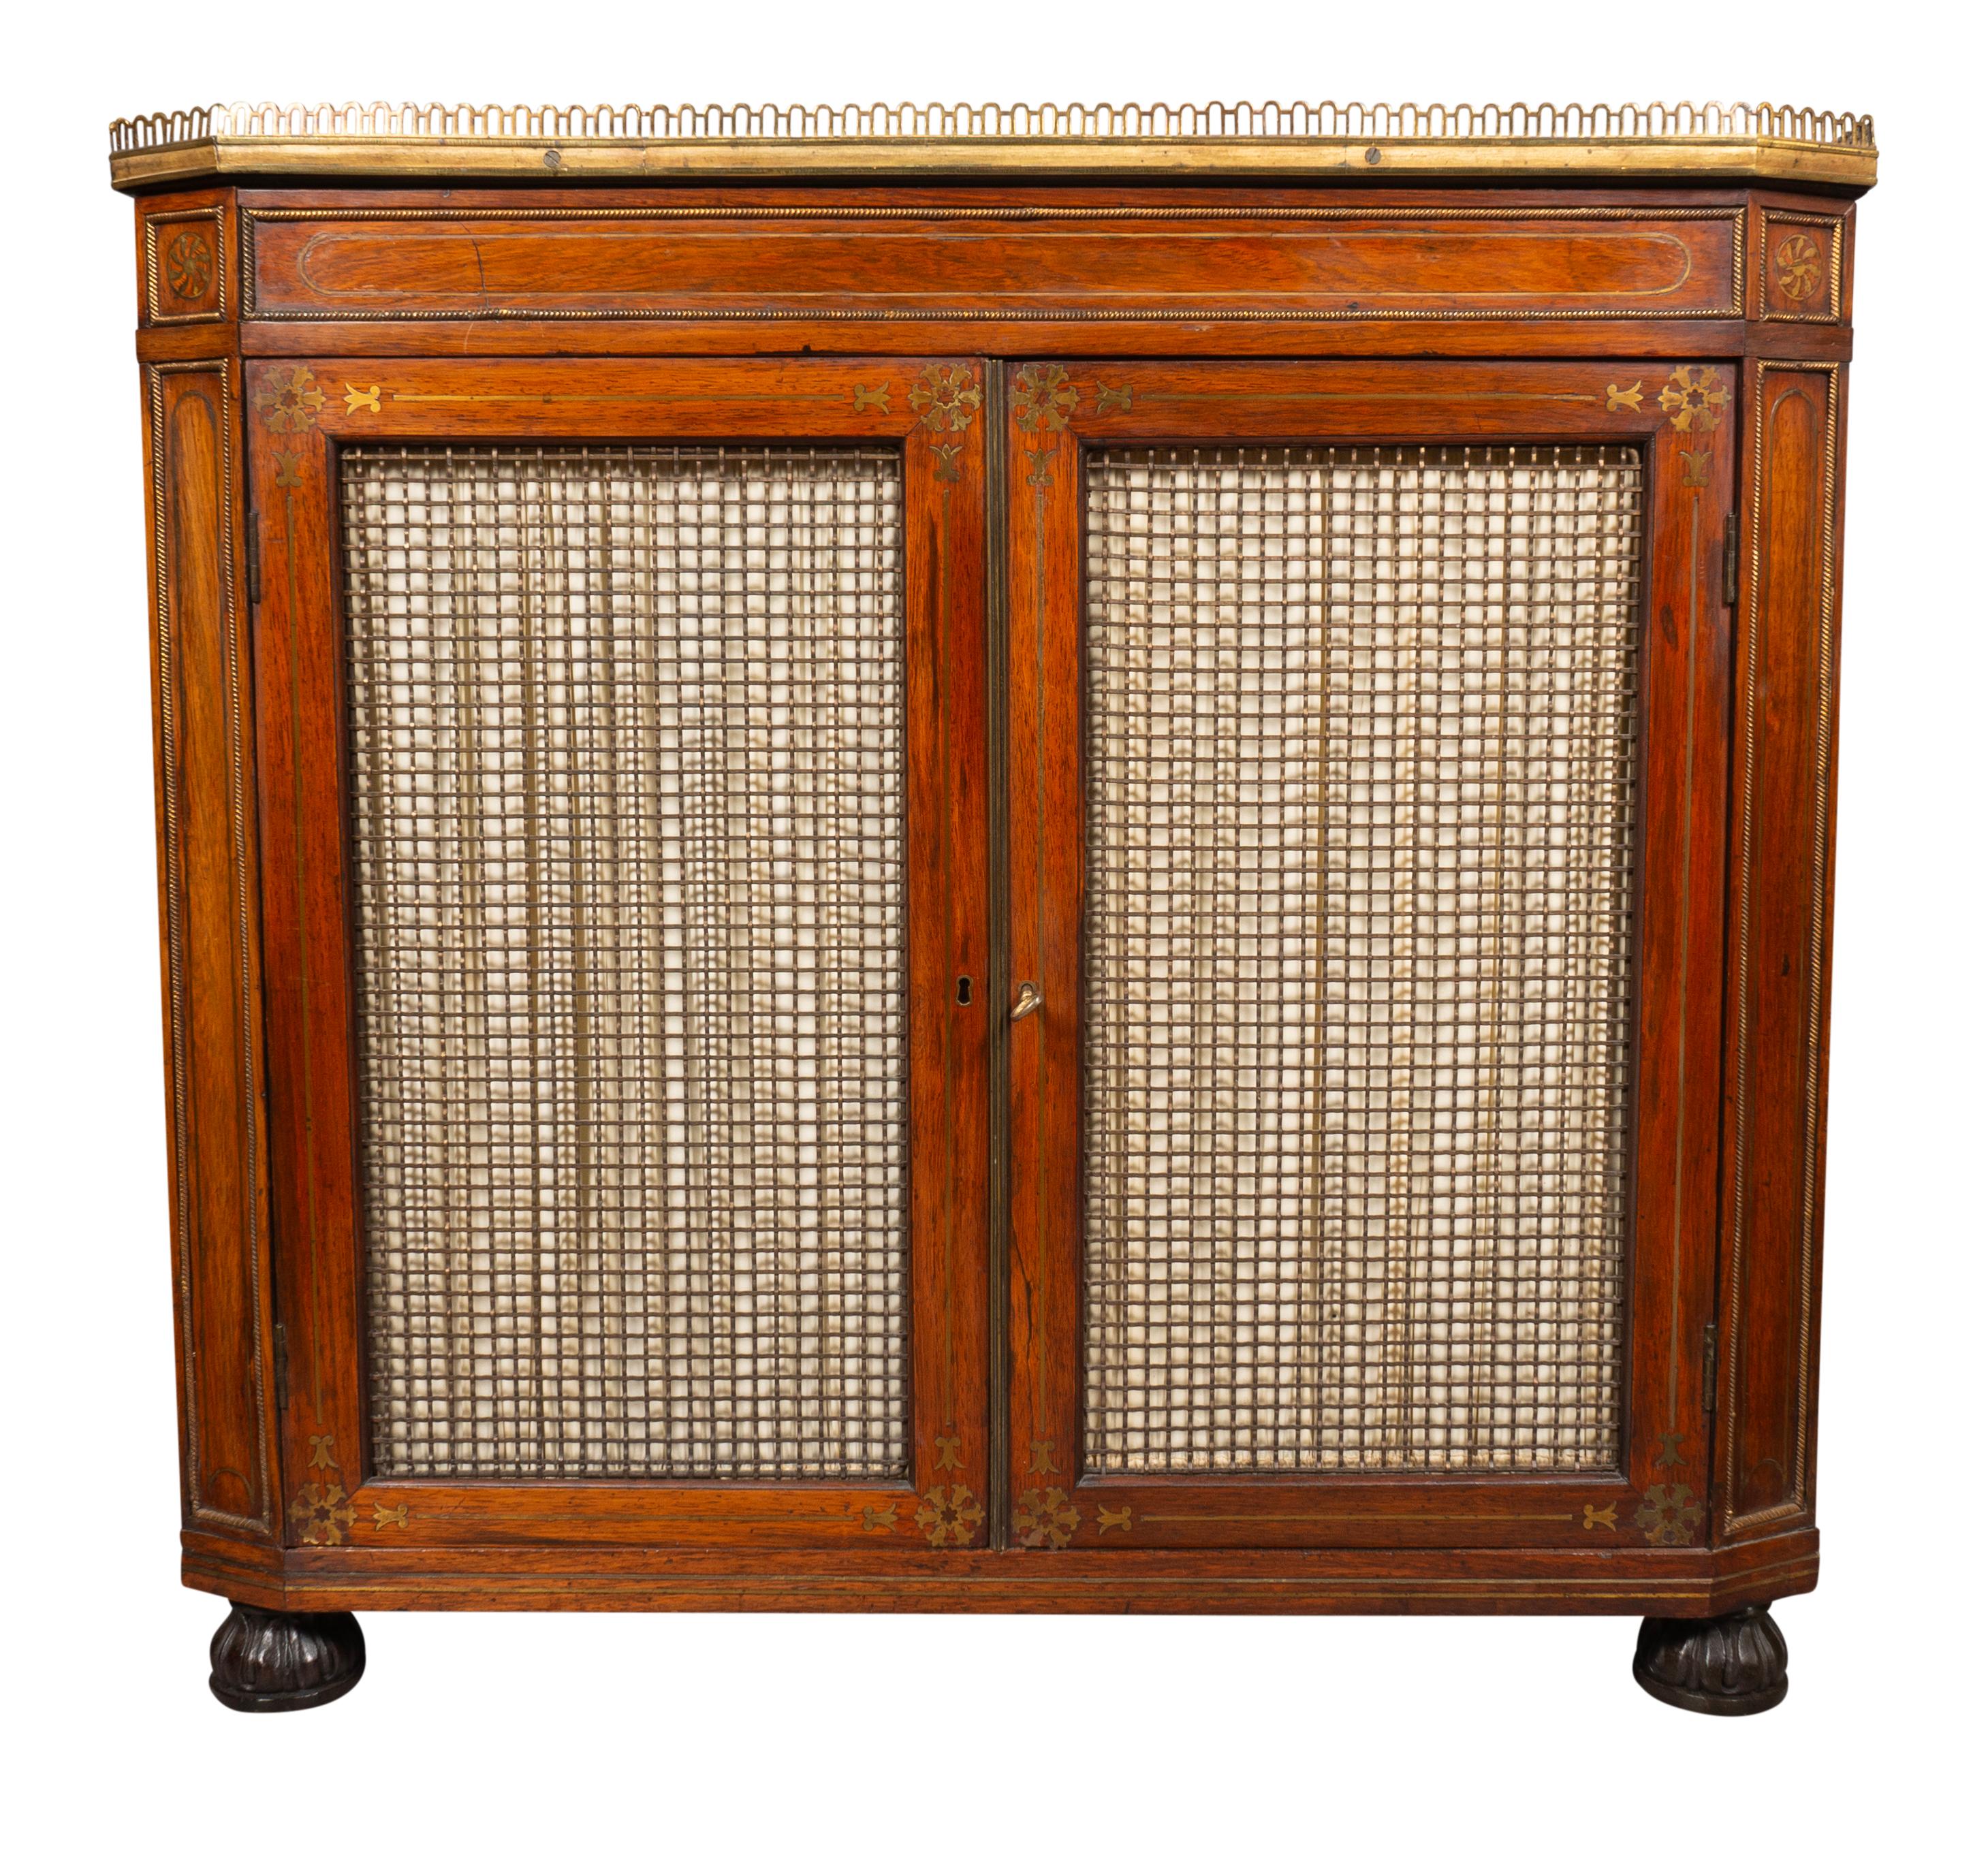 Rectangular top with brass gallery over a pair of grill doors with brass inlay in the manner of John McLean.
Chamfered ends with brass wheel inlay.. Carved bun feet.